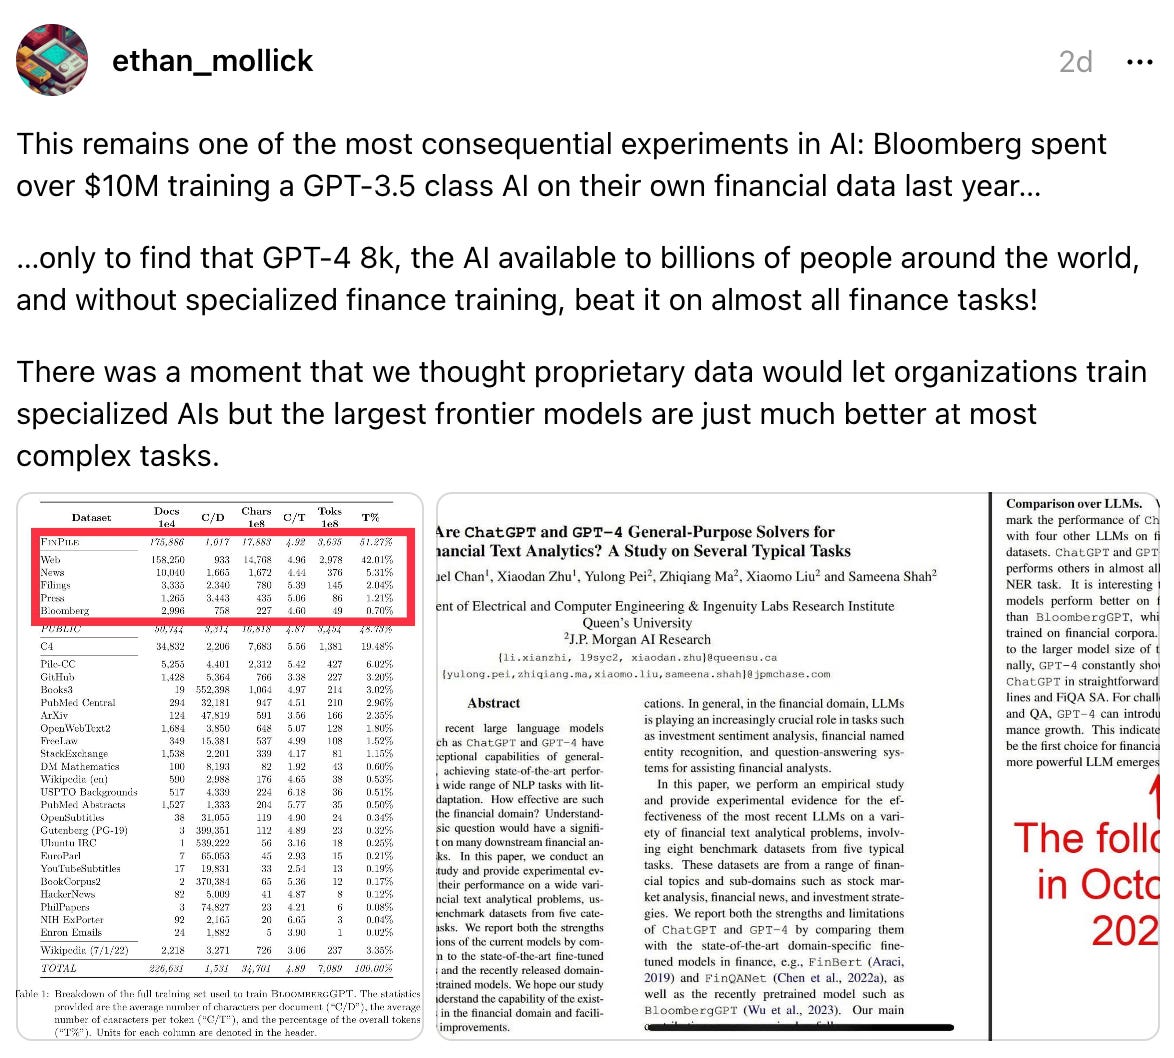 ethan_mollick 2d This remains one of the most consequential experiments in AI: Bloomberg spent over $10M training a GPT-3.5 class AI on their own financial data last year… …only to find that GPT-4 8k, the AI available to billions of people around the world, and without specialized finance training, beat it on almost all finance tasks! There was a moment that we thought proprietary data would let organizations train specialized AIs but the largest frontier models are just much better at most complex tasks.